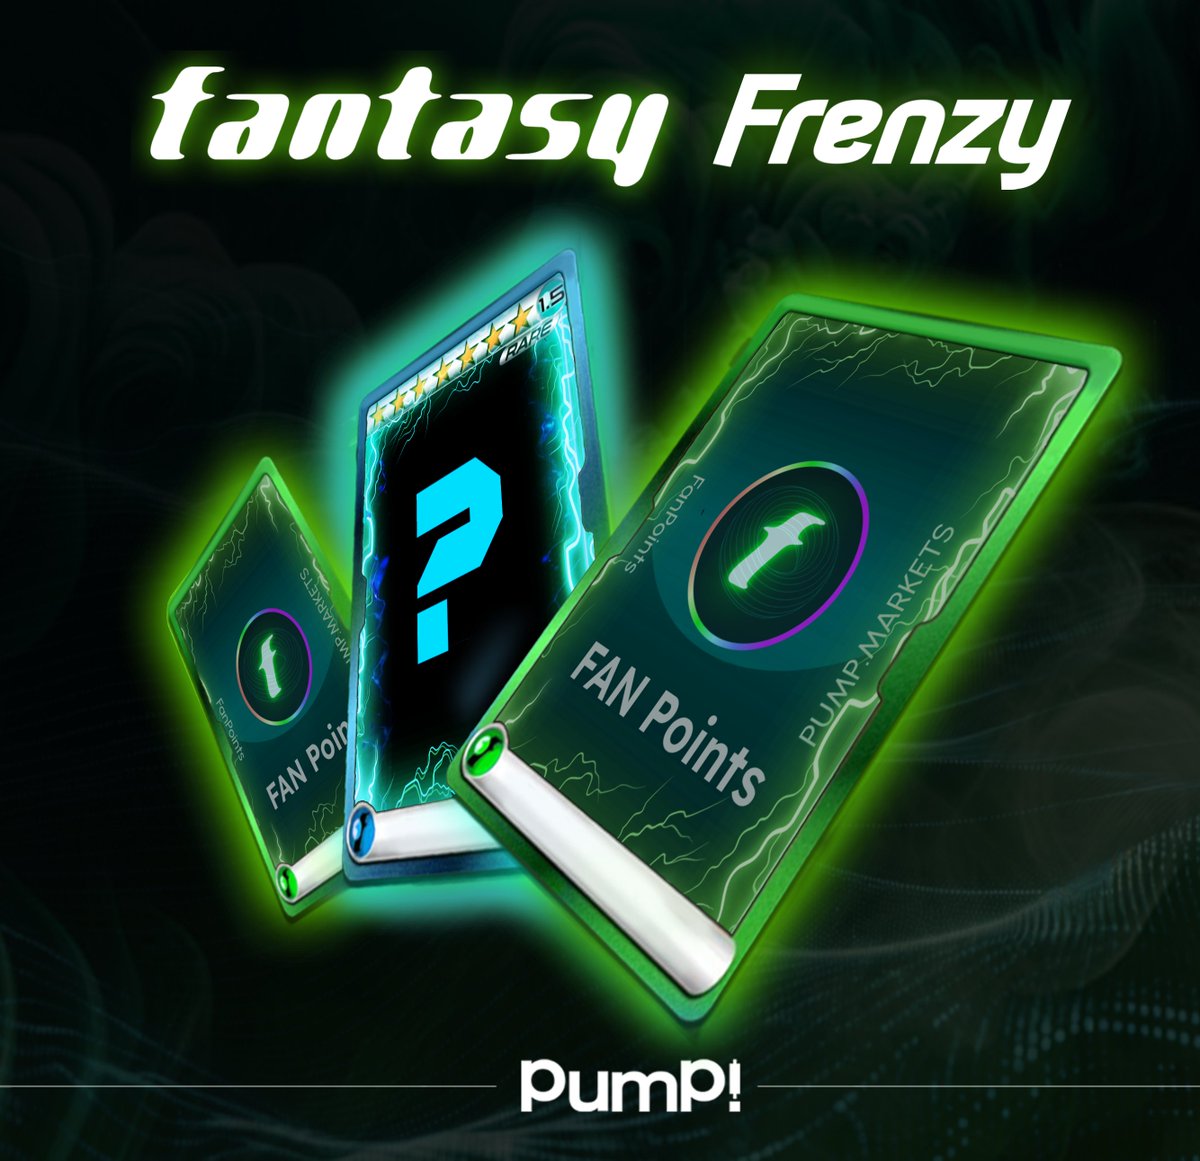 🏆 Pump It Up: Fantasy Frenzy Competition 🏆
 
Prize Pool:

🦸‍♂️ 1x Rare Fantasy Top Hero card
✨ 1x Epic FAN Points bundle
💫 1x Legendary FAN Points bundle
 
🚨 Live for 72 hours only! 🚨
 
How to win: 👇
 
• Buy or Sell FAN Points on Pump Markets
• Share your trade following